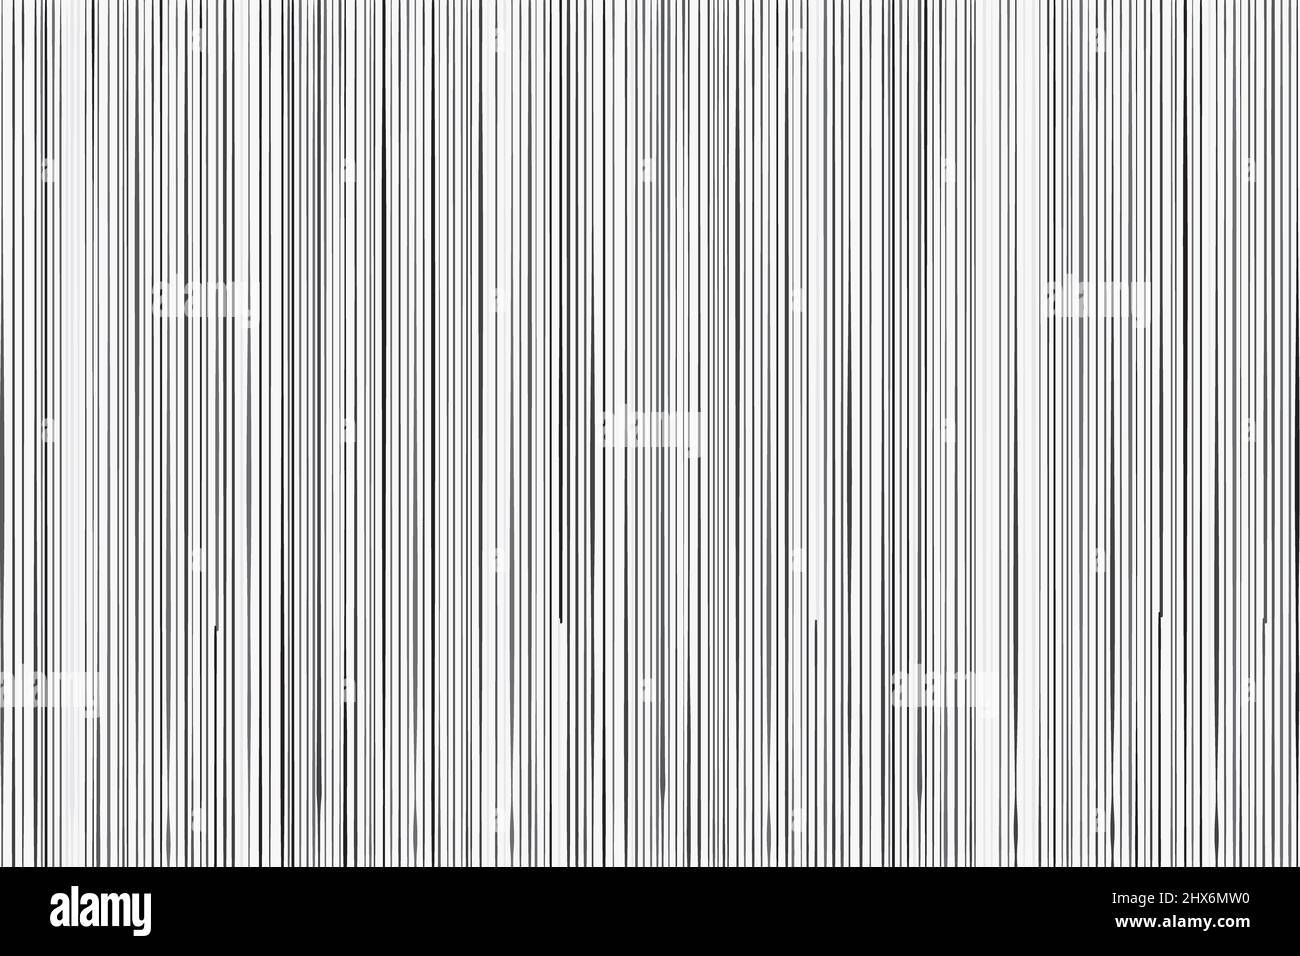 Striped background with lines of different thickness and intensity Stock Photo